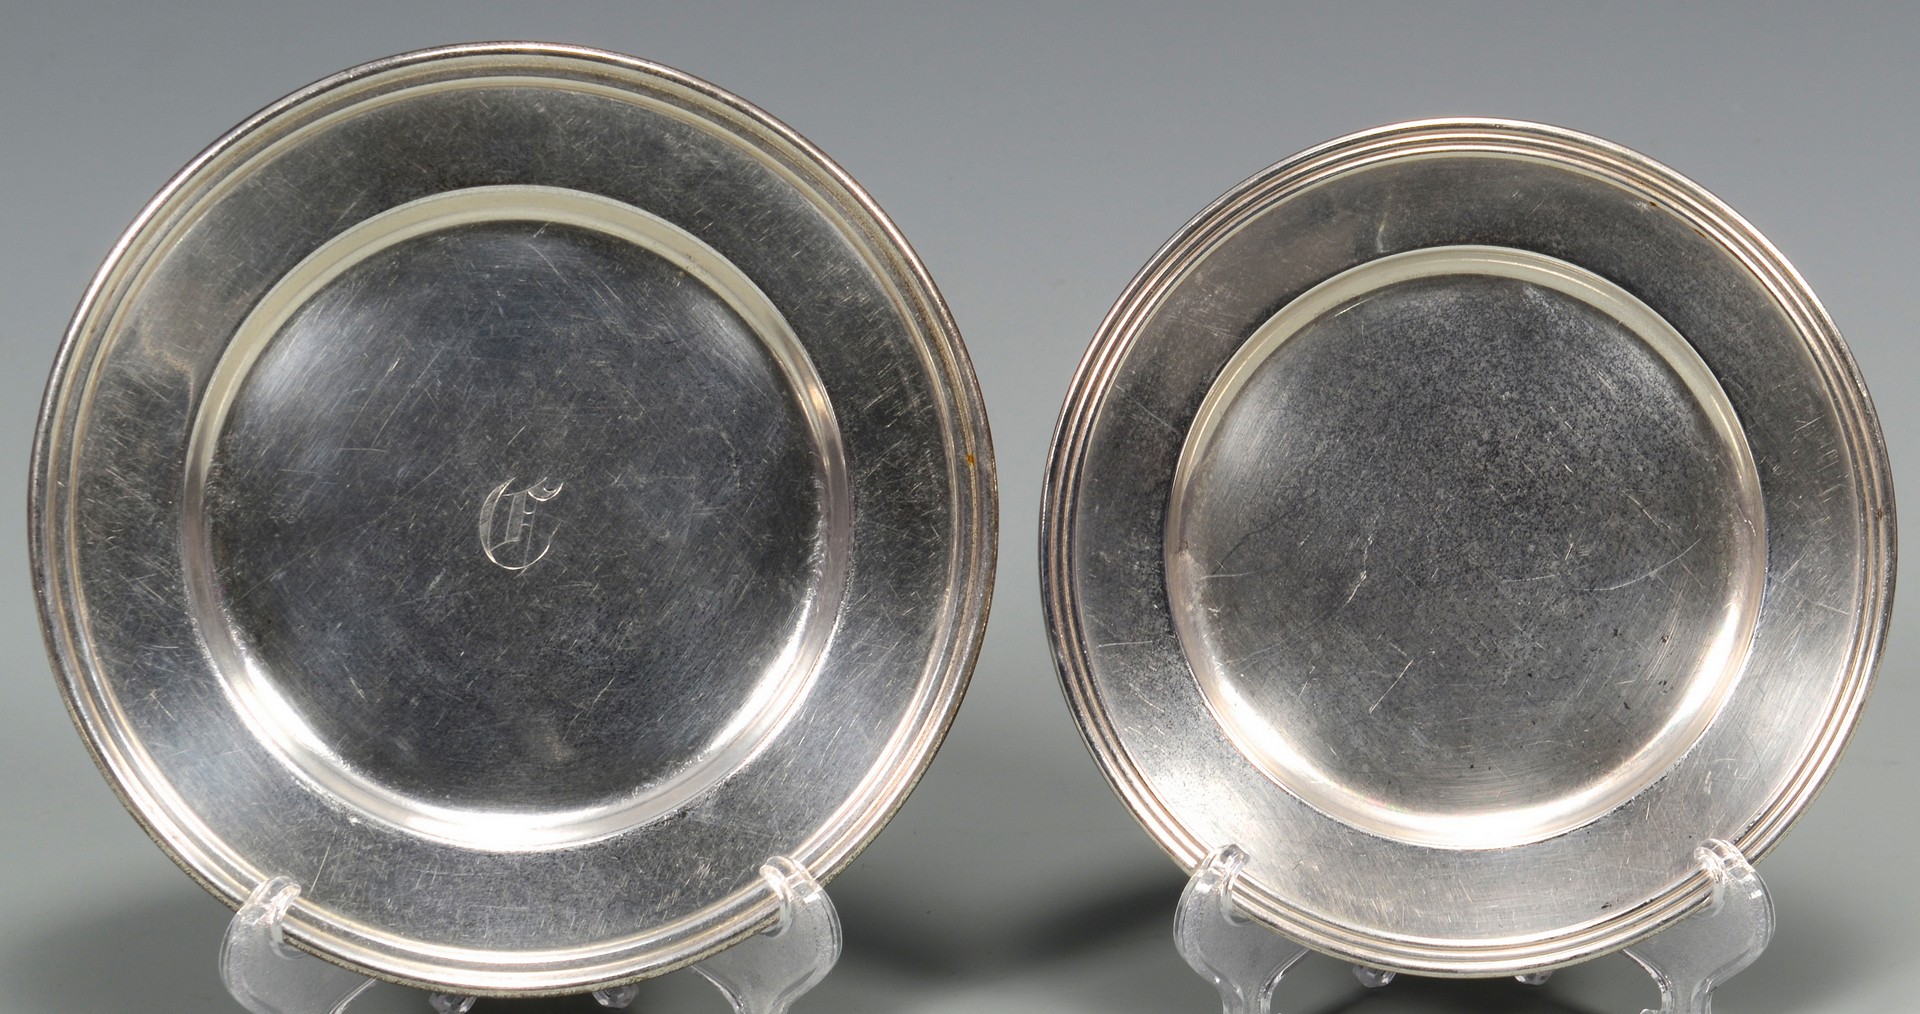 Lot 675: 14 Sterling Bread & Butter Plates